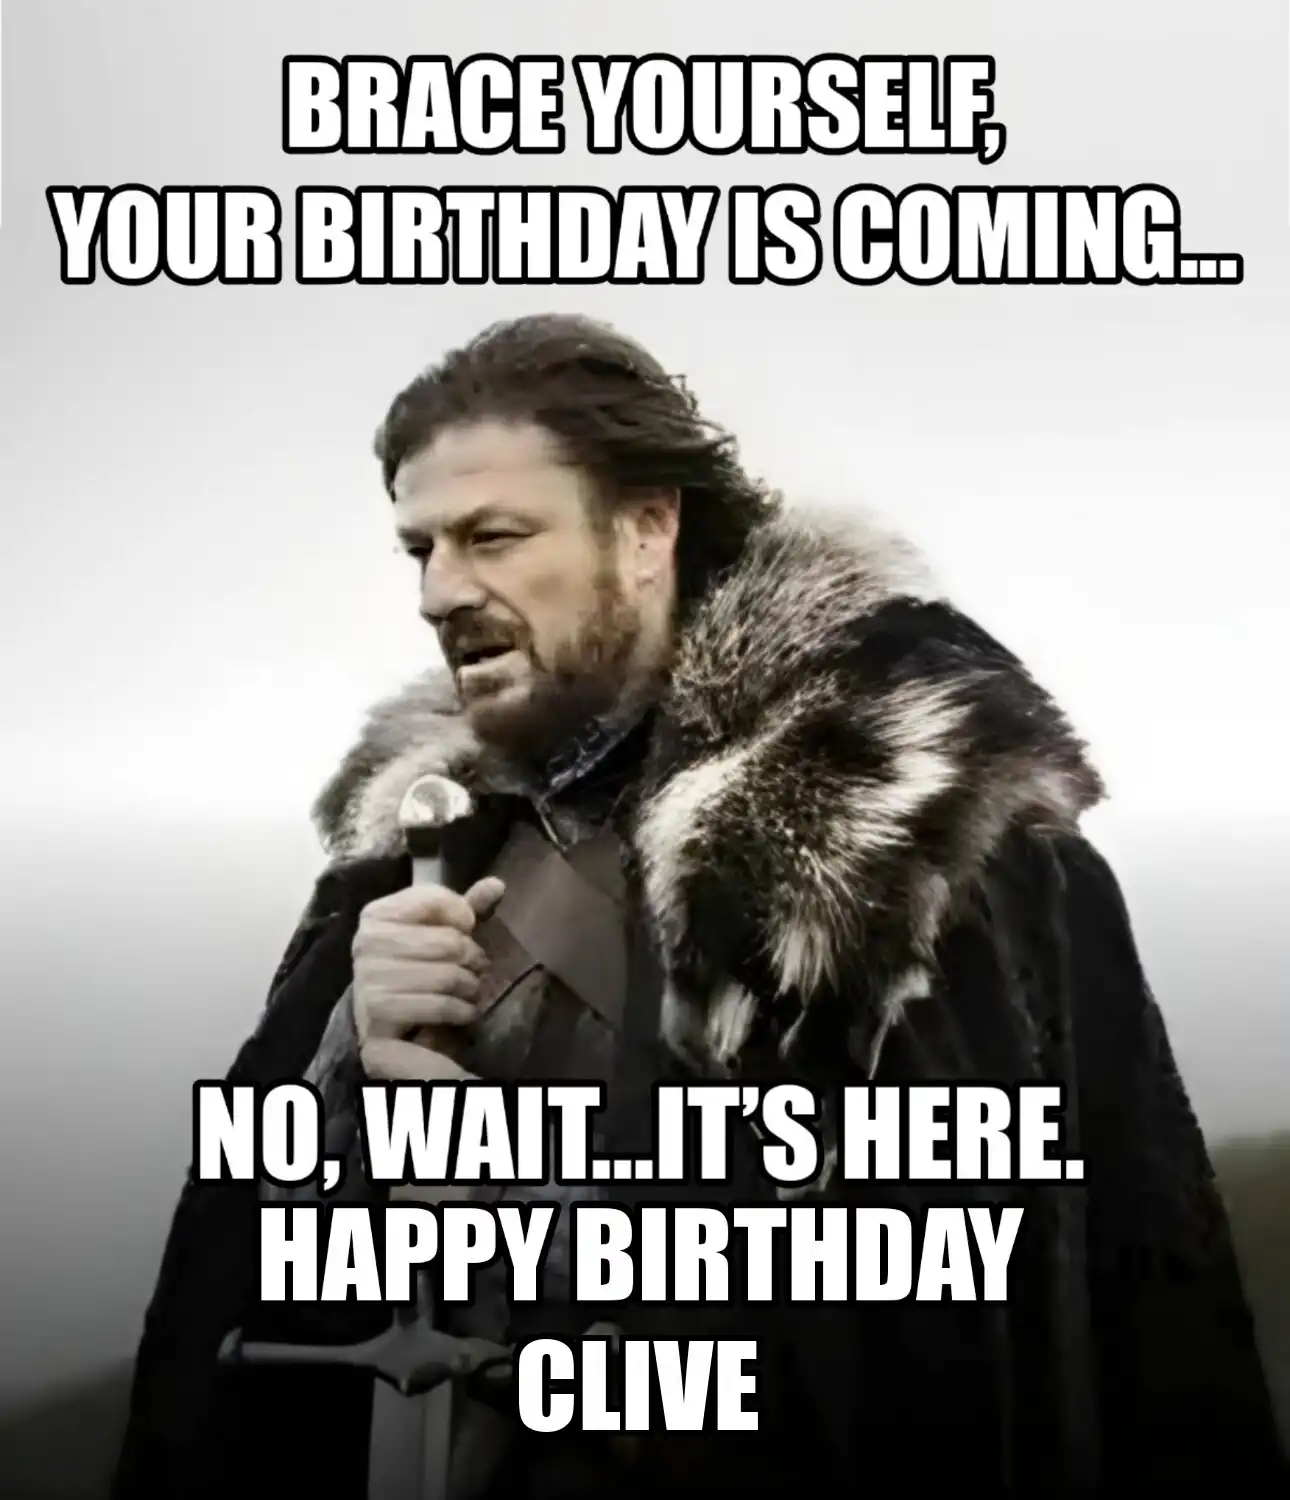 Happy Birthday Clive Brace Yourself Your Birthday Is Coming Meme